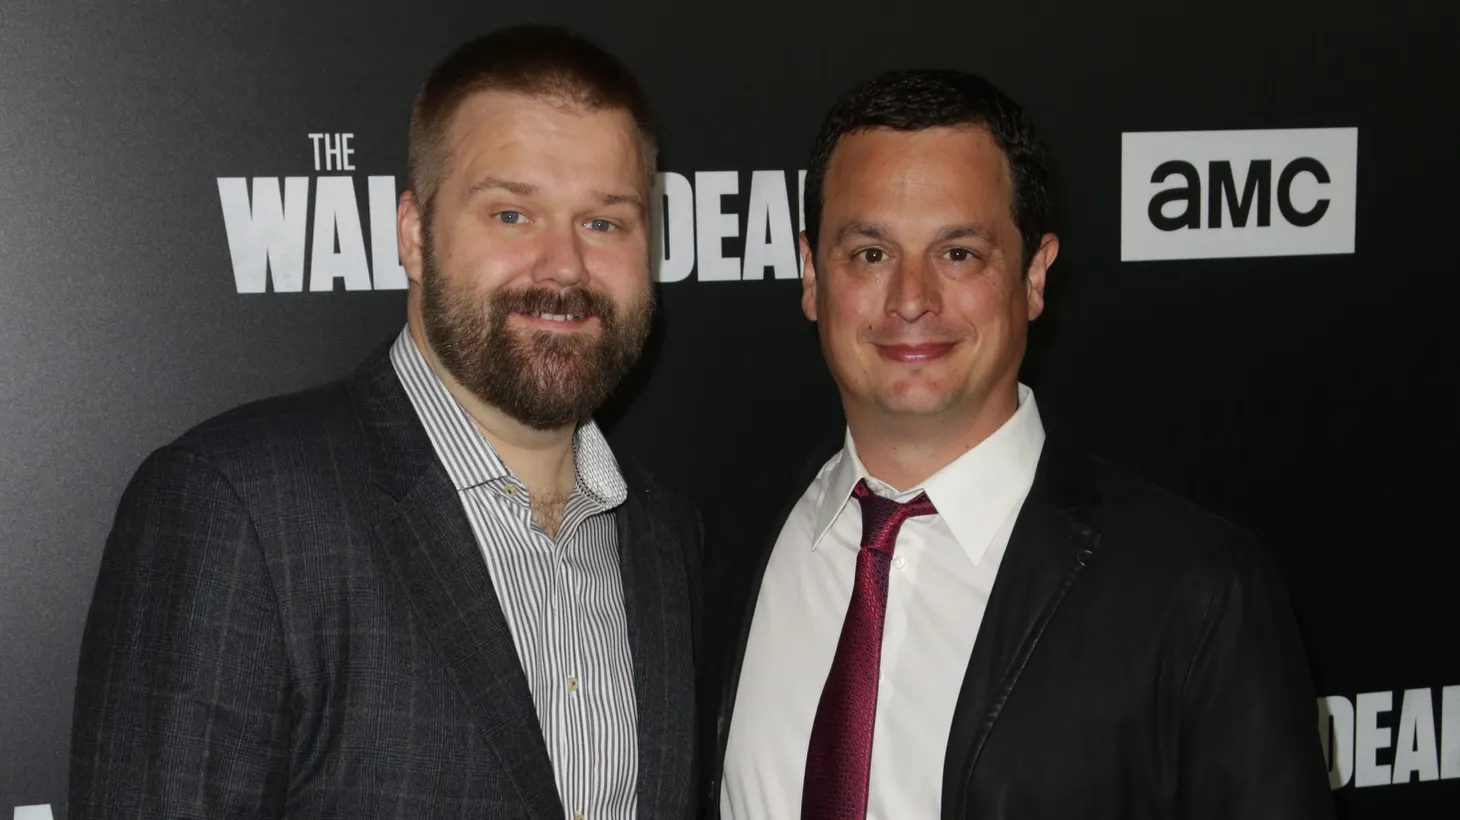 Screenwriter Robert Kirkman (Right) and Executive Producer Dave Alpert attend AMC’s “The Walking Dead” Season 9 special screening event at the DGA Theater Complex in Los Angeles, on September 27, 2018.